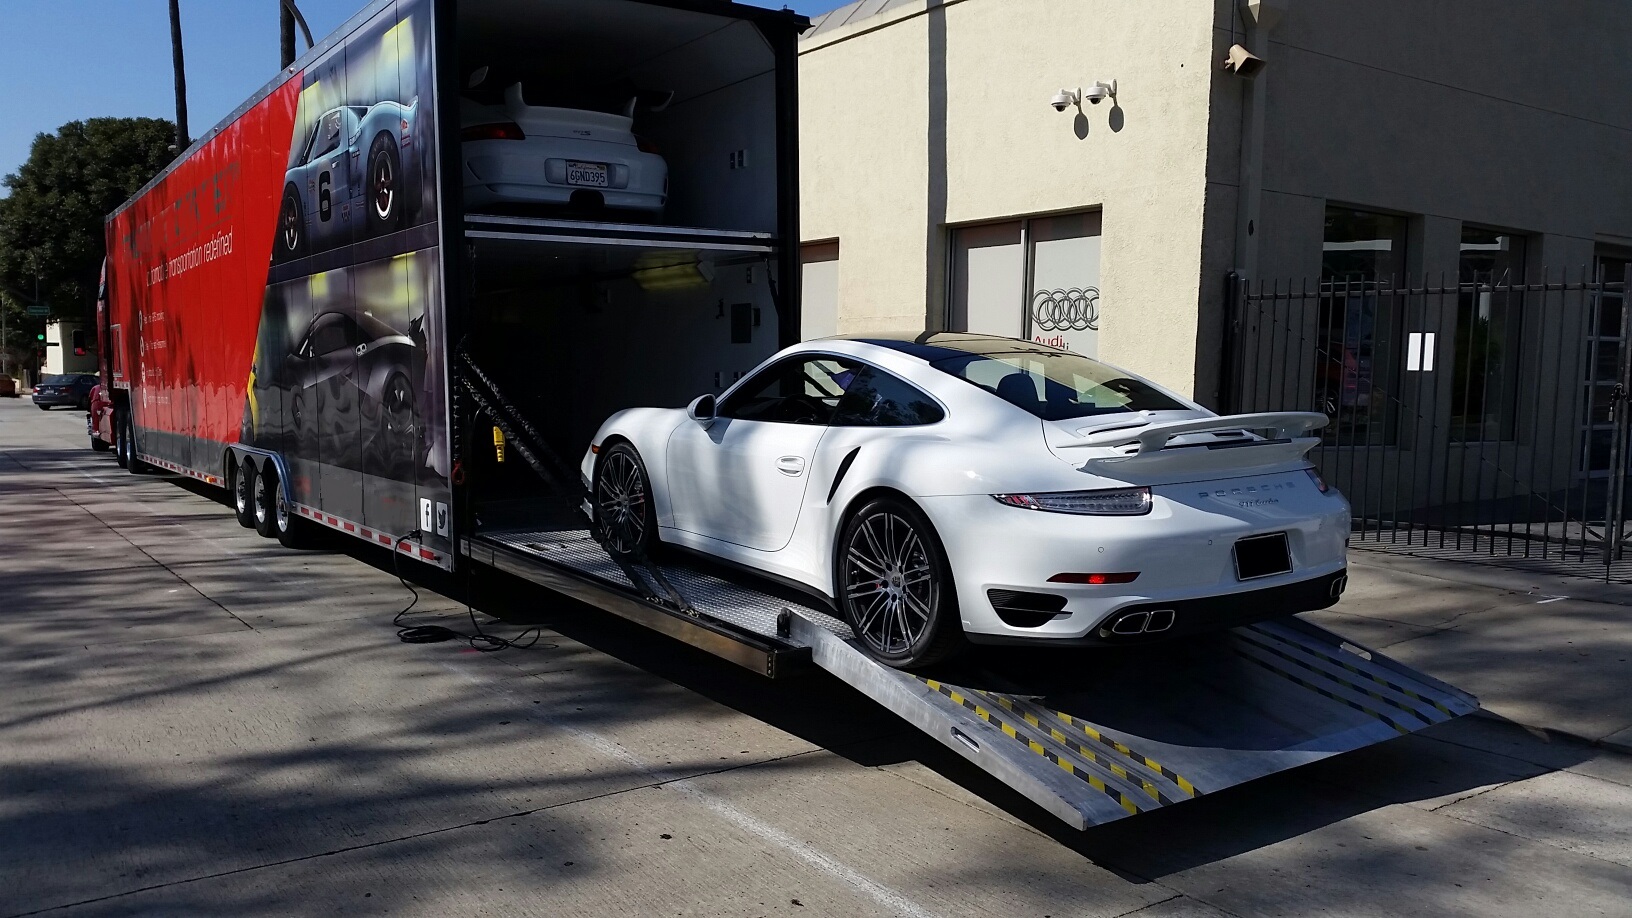 Shipping a luxury car How to Ship Your Vehicle Cross Country, Safely?